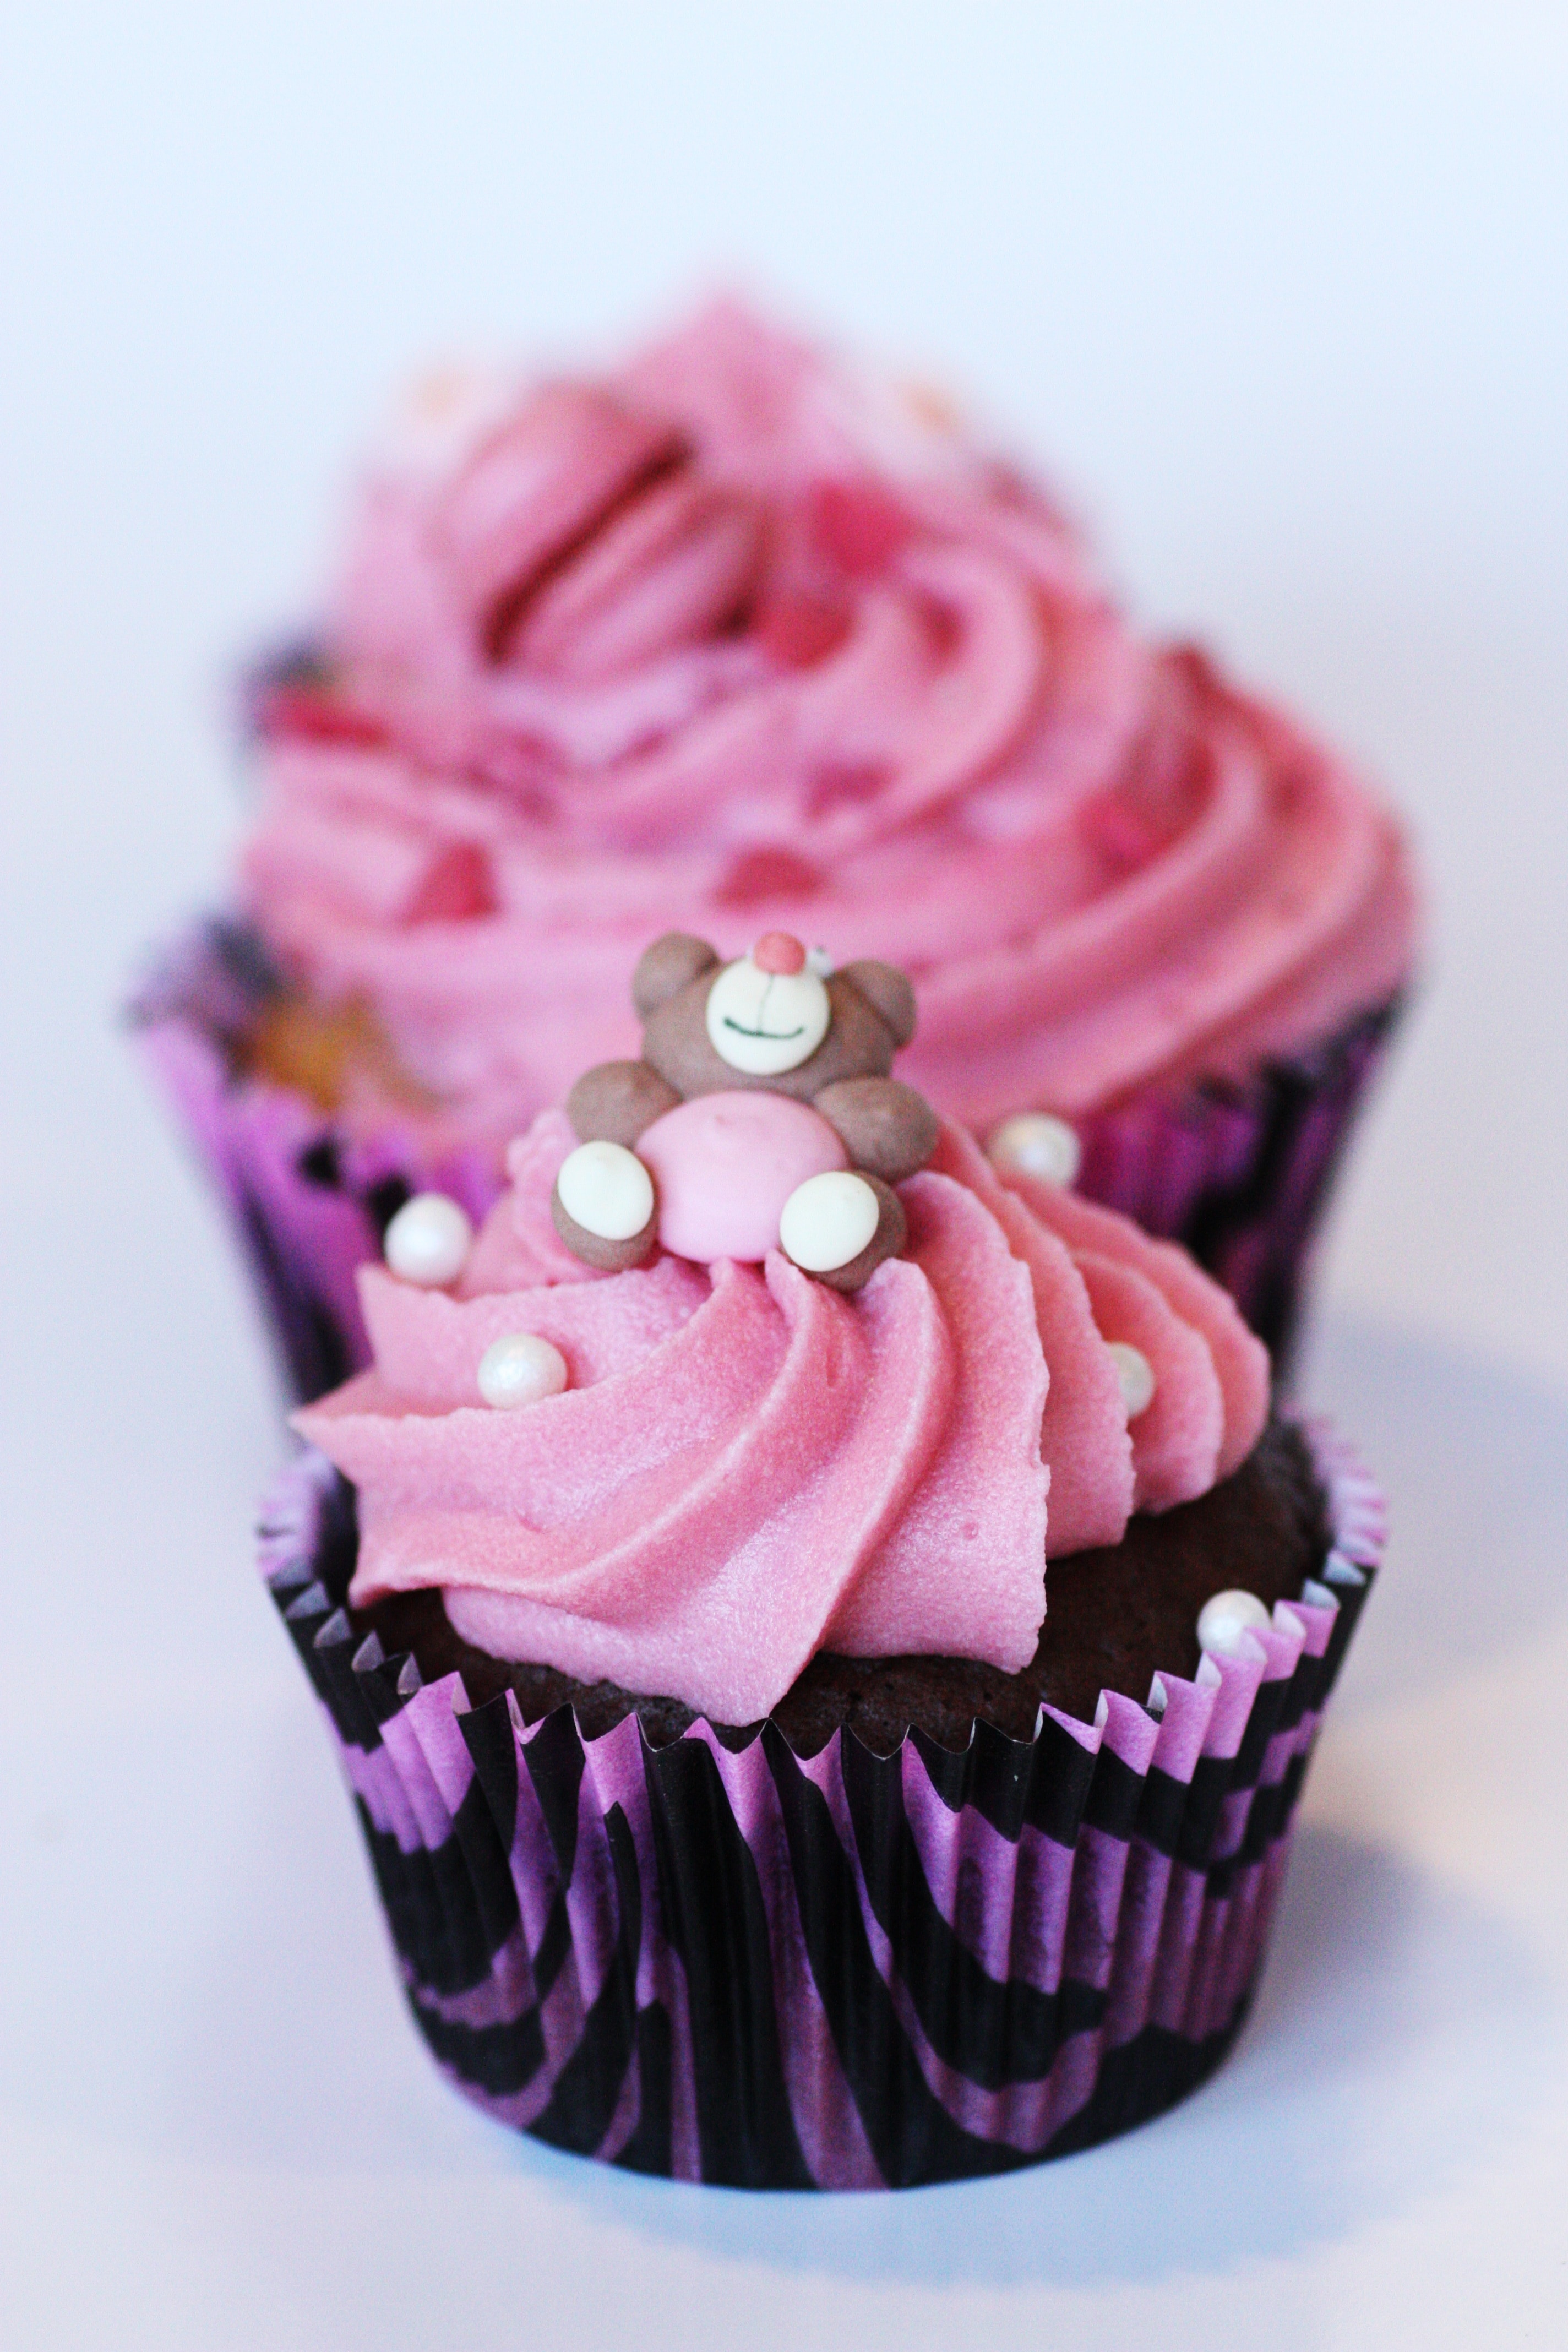 Muffins, Muffin, Cupcake, sweet food, pink color